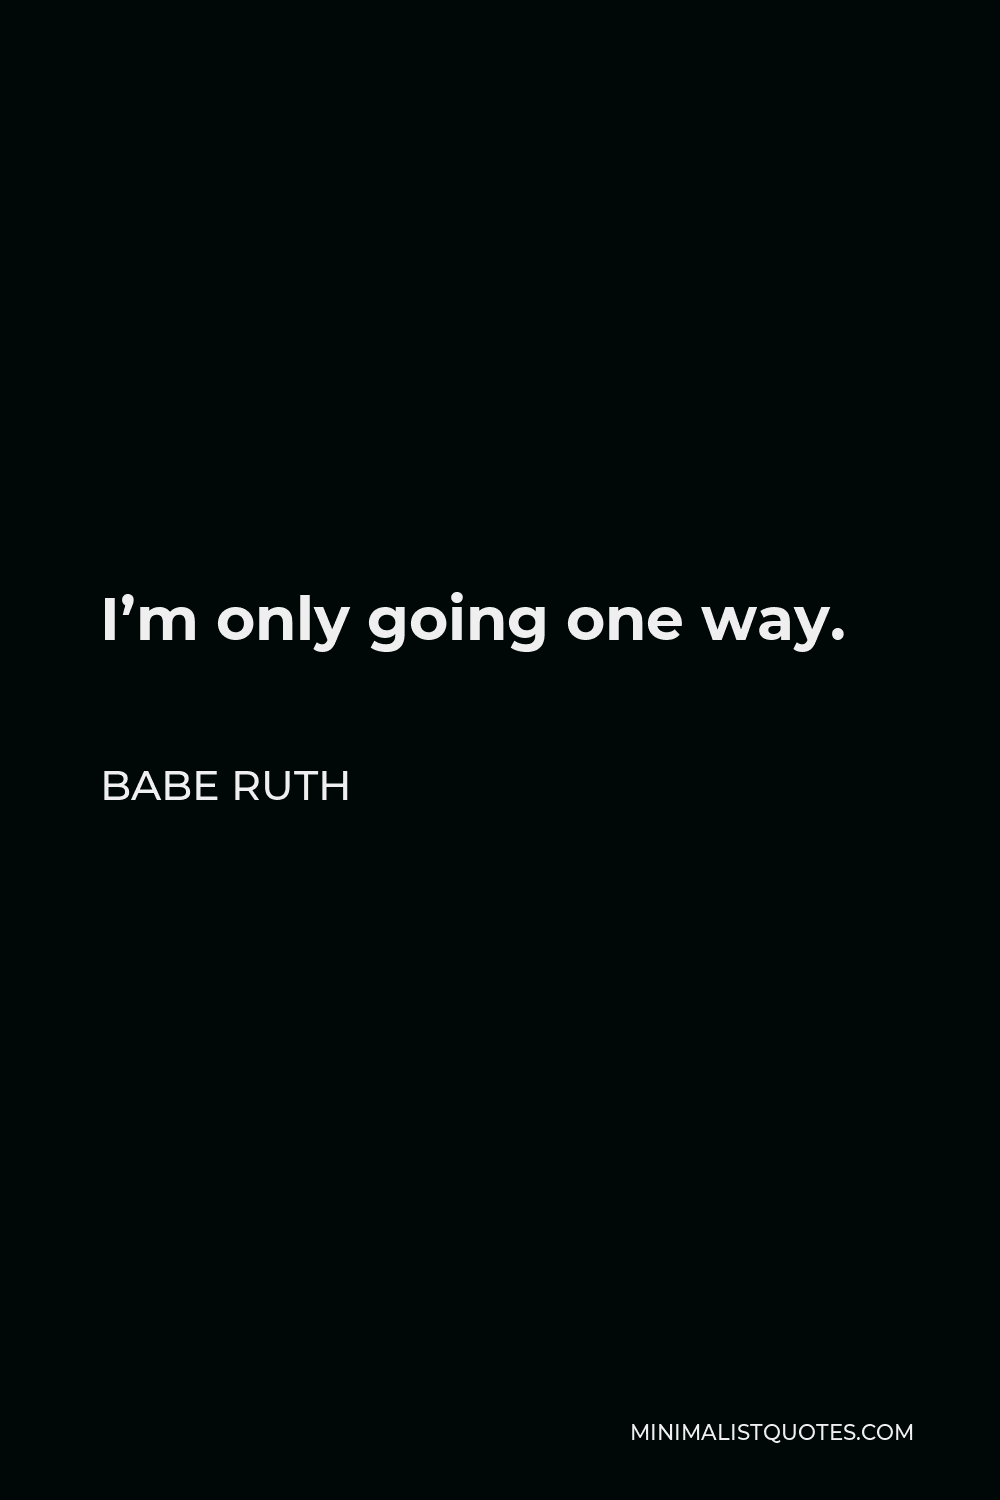 Babe Ruth Quote - I’m only going one way.